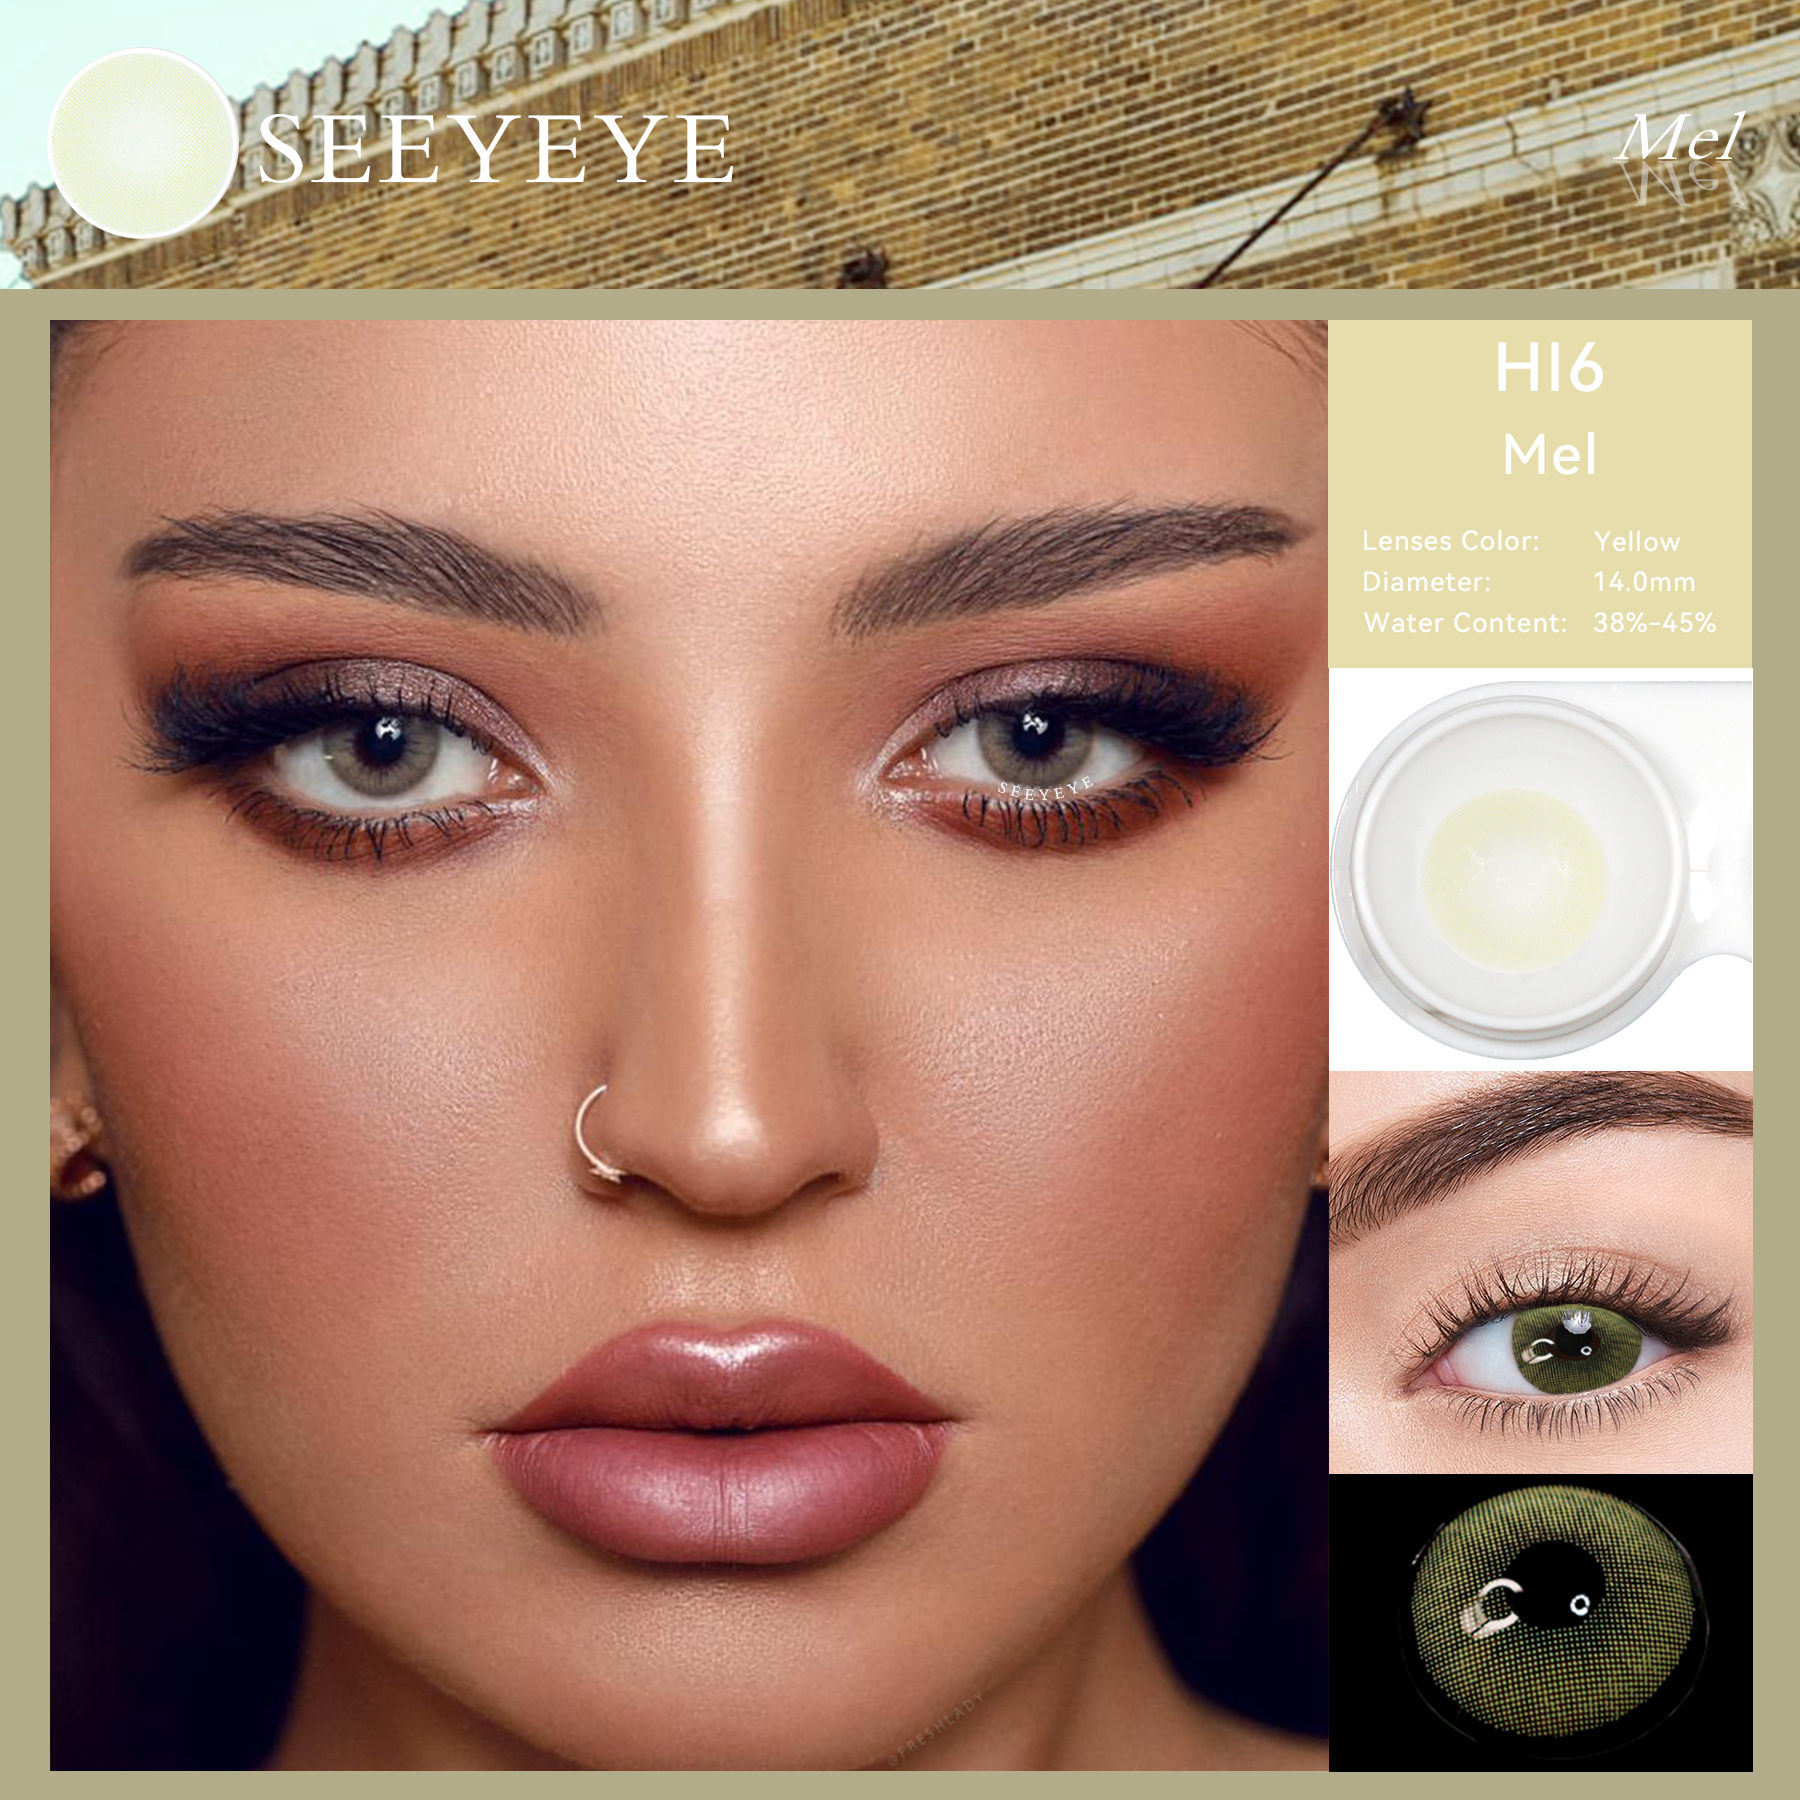 Seeyeye Hi Series Natural Looking Chinese Cosmetic Wholesale Color Contact Lens Barato nga Soft Yeared Eye Colored Contact Lens